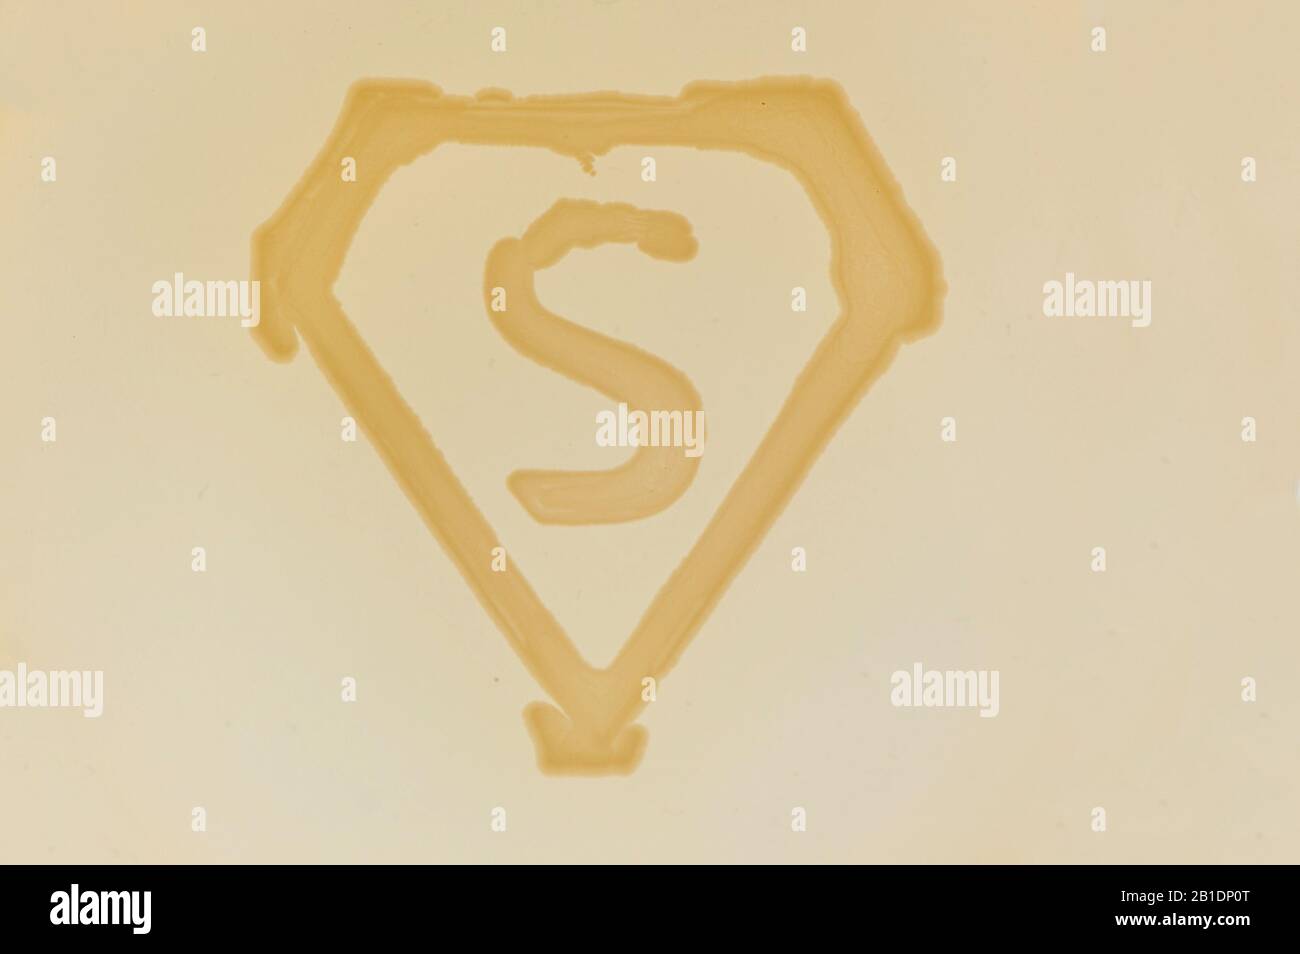 super germ sign made of bacterial culture in shape of letter s Stock Photo